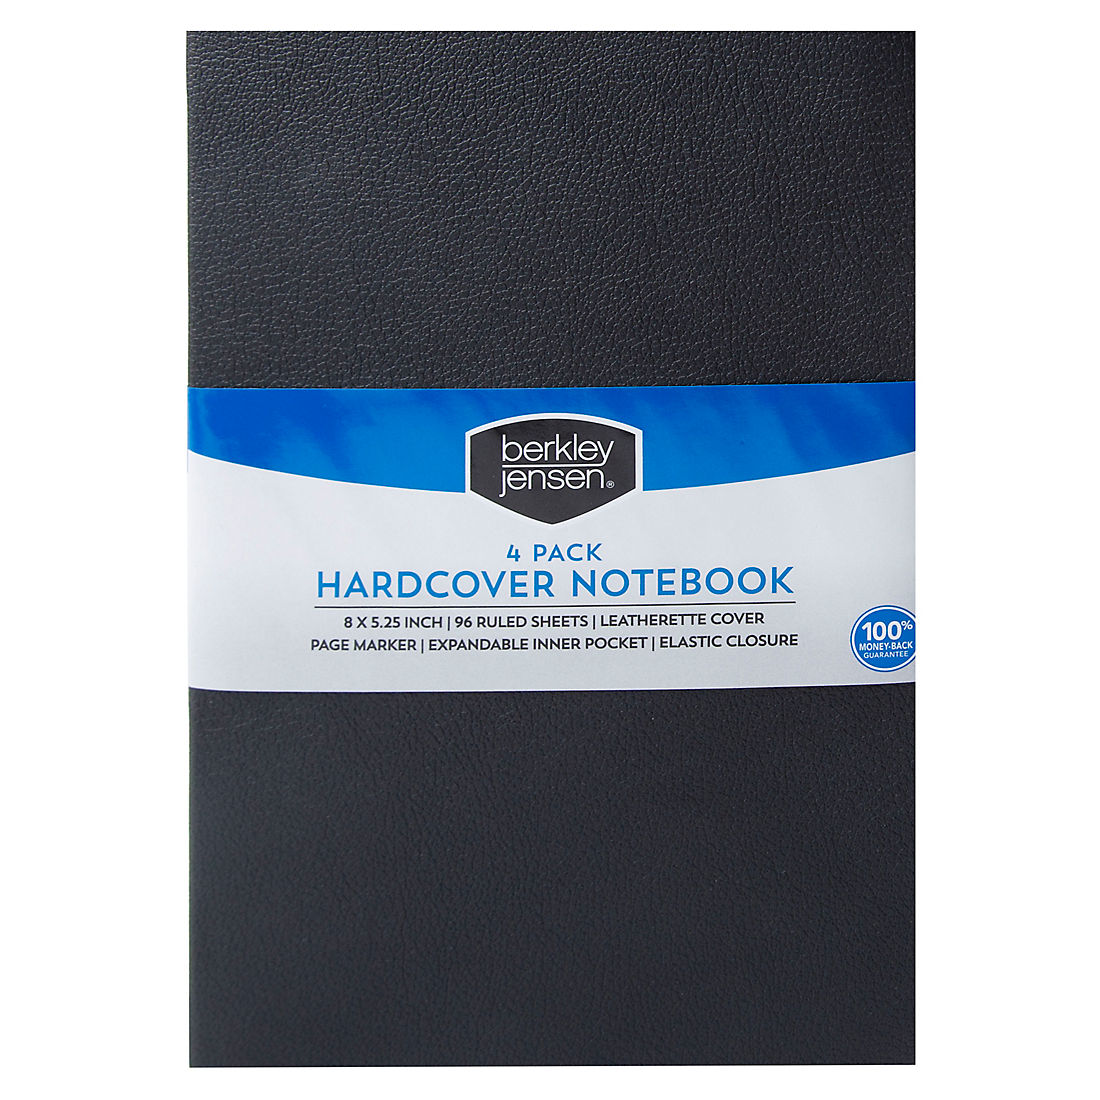 Black Paper Journal: Wide Ruled Lined Paper, Black Pages & white Lines, Black Leather Texture Cover, 100 pages